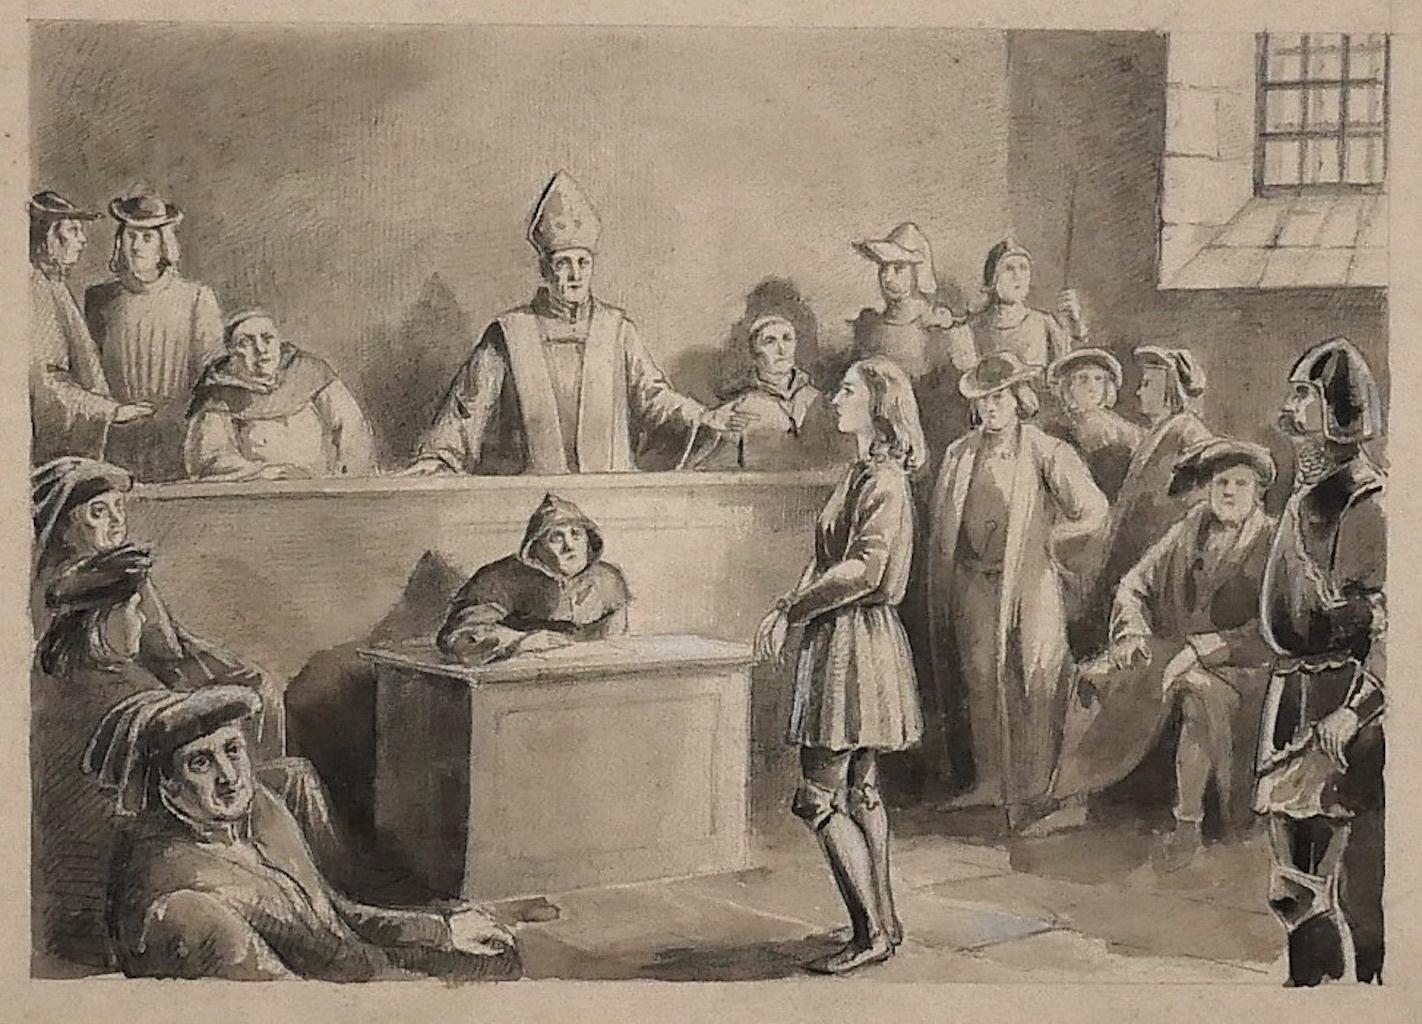 Trial - Ink and Watercolor - 19th Century